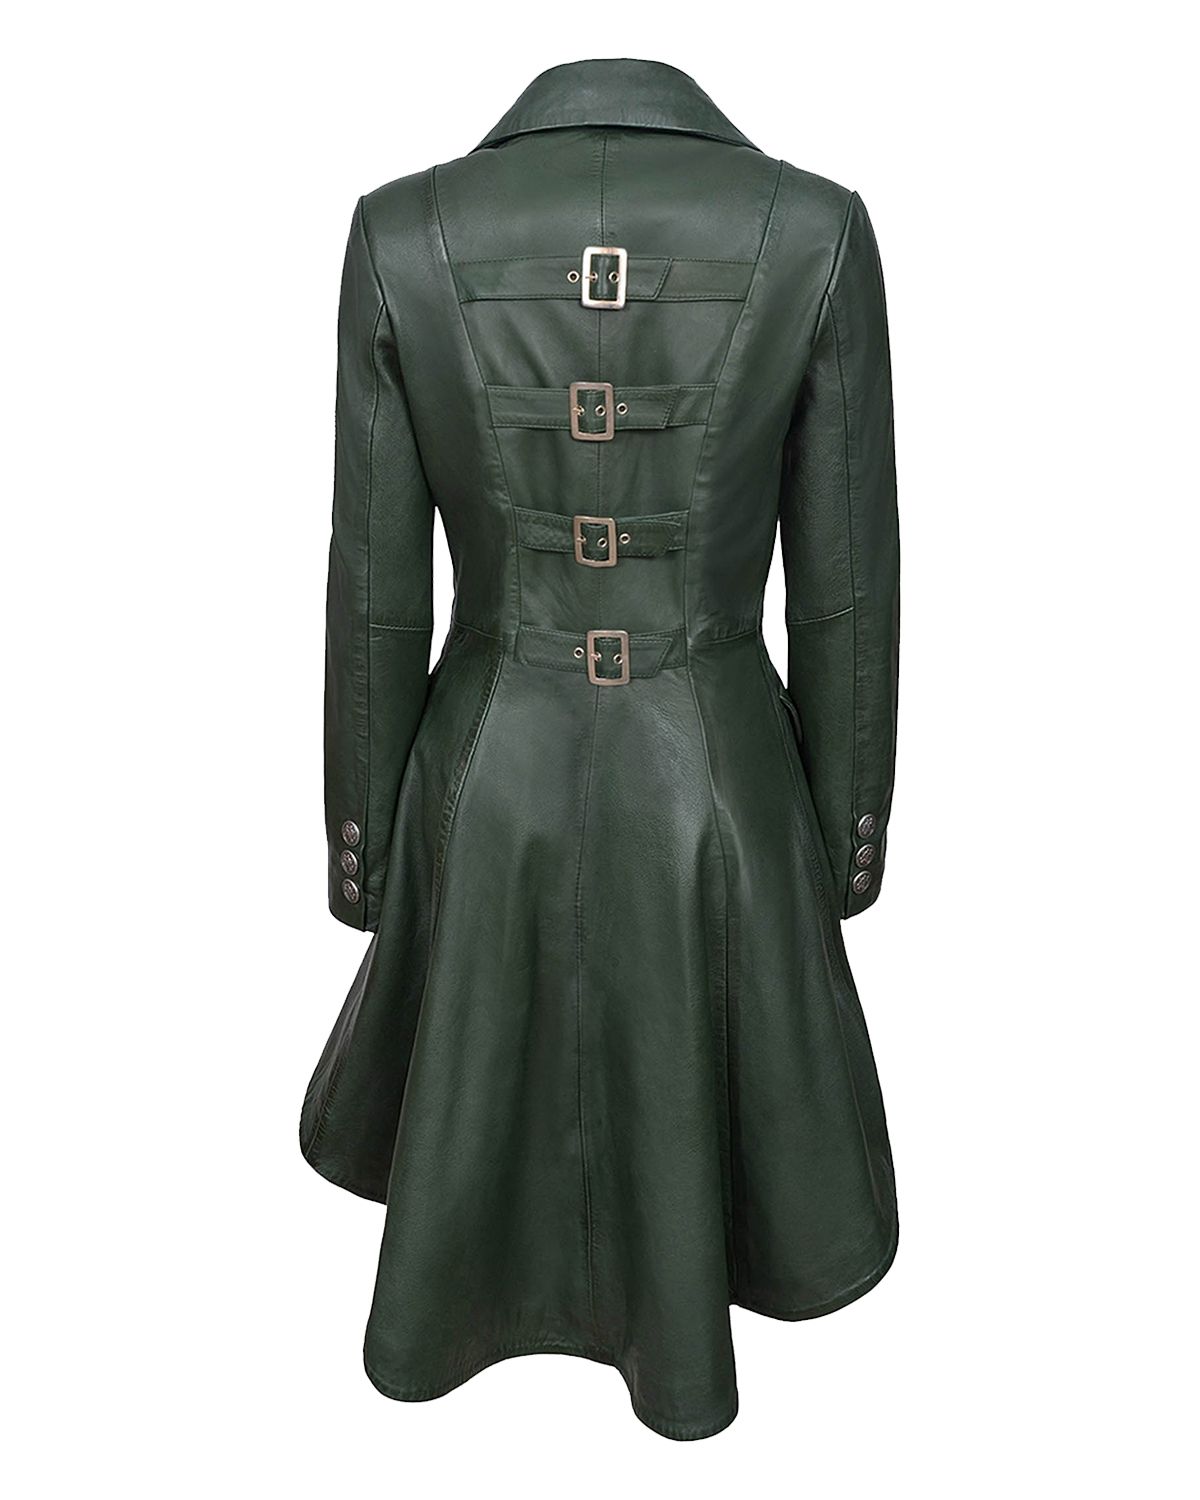 Elite Women's Back Buckle Real Leather Long Gothic Coat